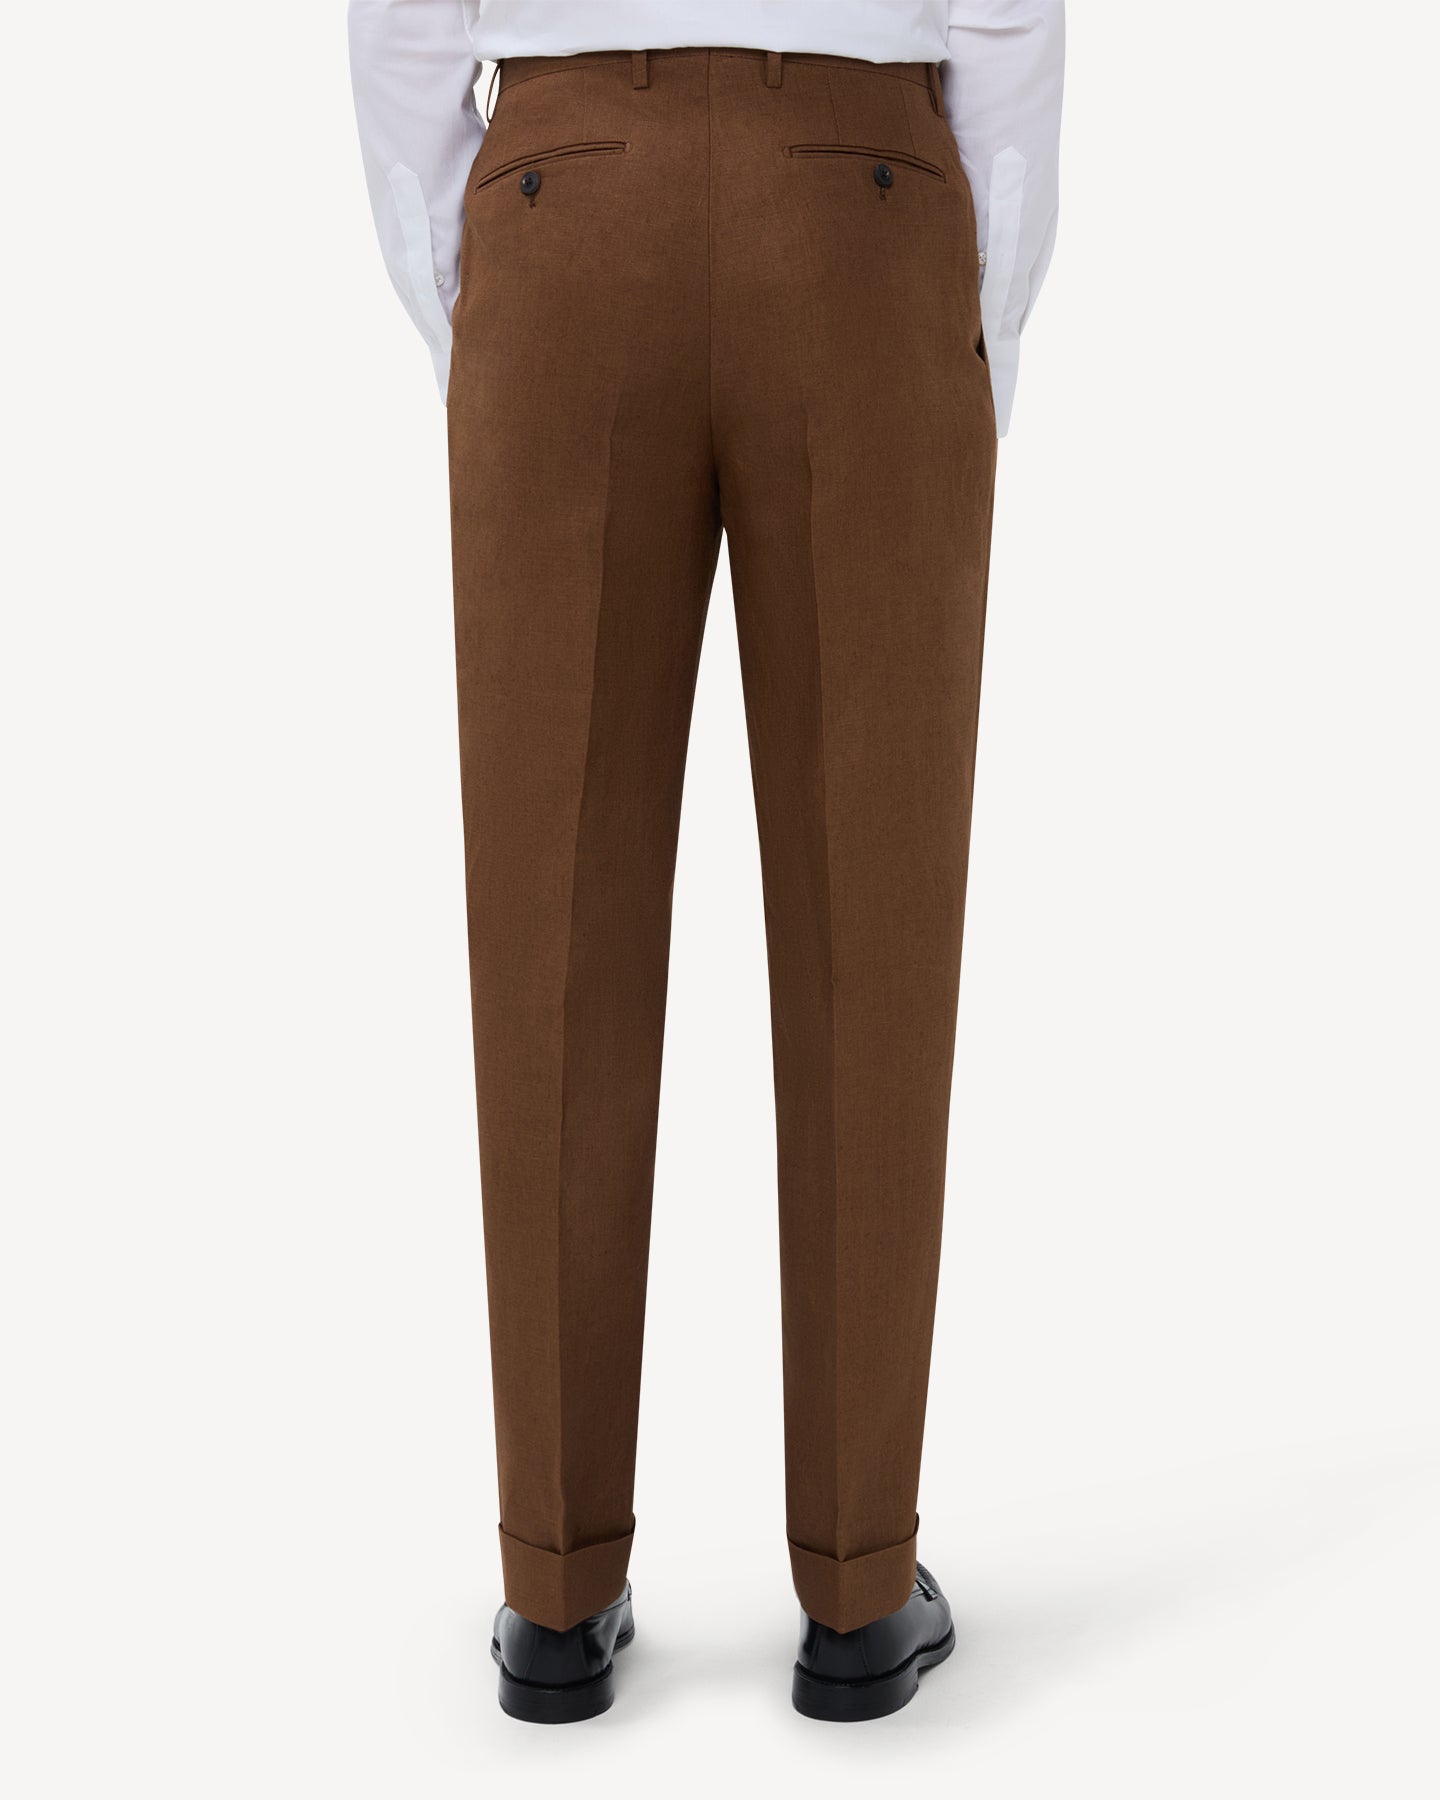 The back of dark tan linen trousers with double pleats and belt loops